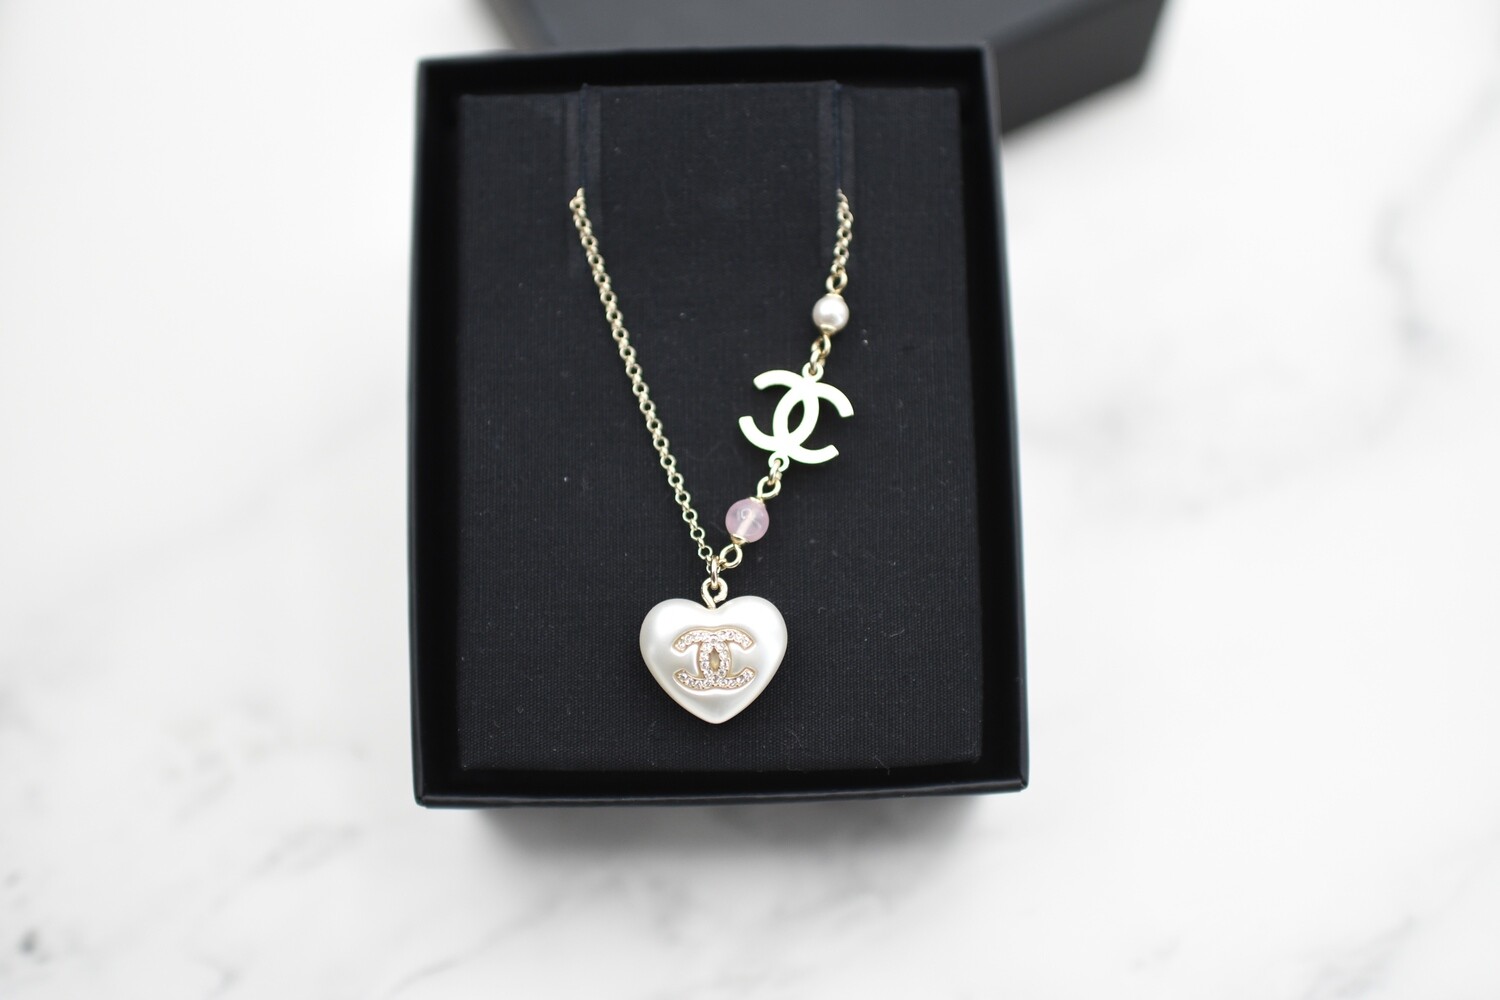 Chanel Necklace CC Heart, Gold Hardware with Crystals, New in Box GA001 -  Julia Rose Boston